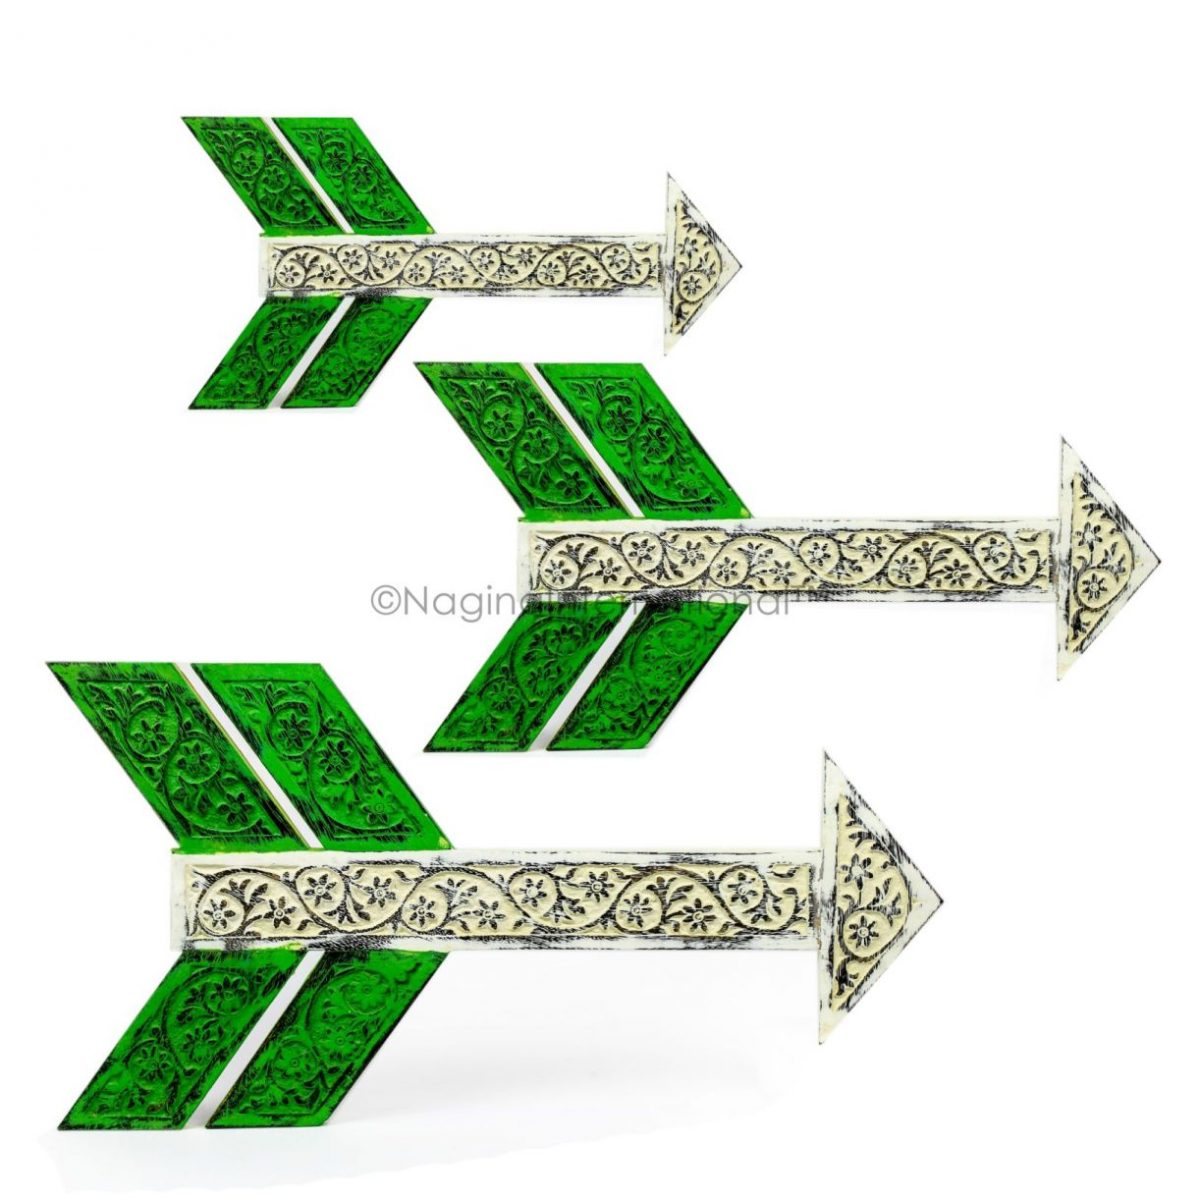 Nagina International Rustic Colorful Handcrafted Wooden Wall Decor Carved Arrows | Exclusive Vintage & Antique Home Decorative Piece (Antique Green White)